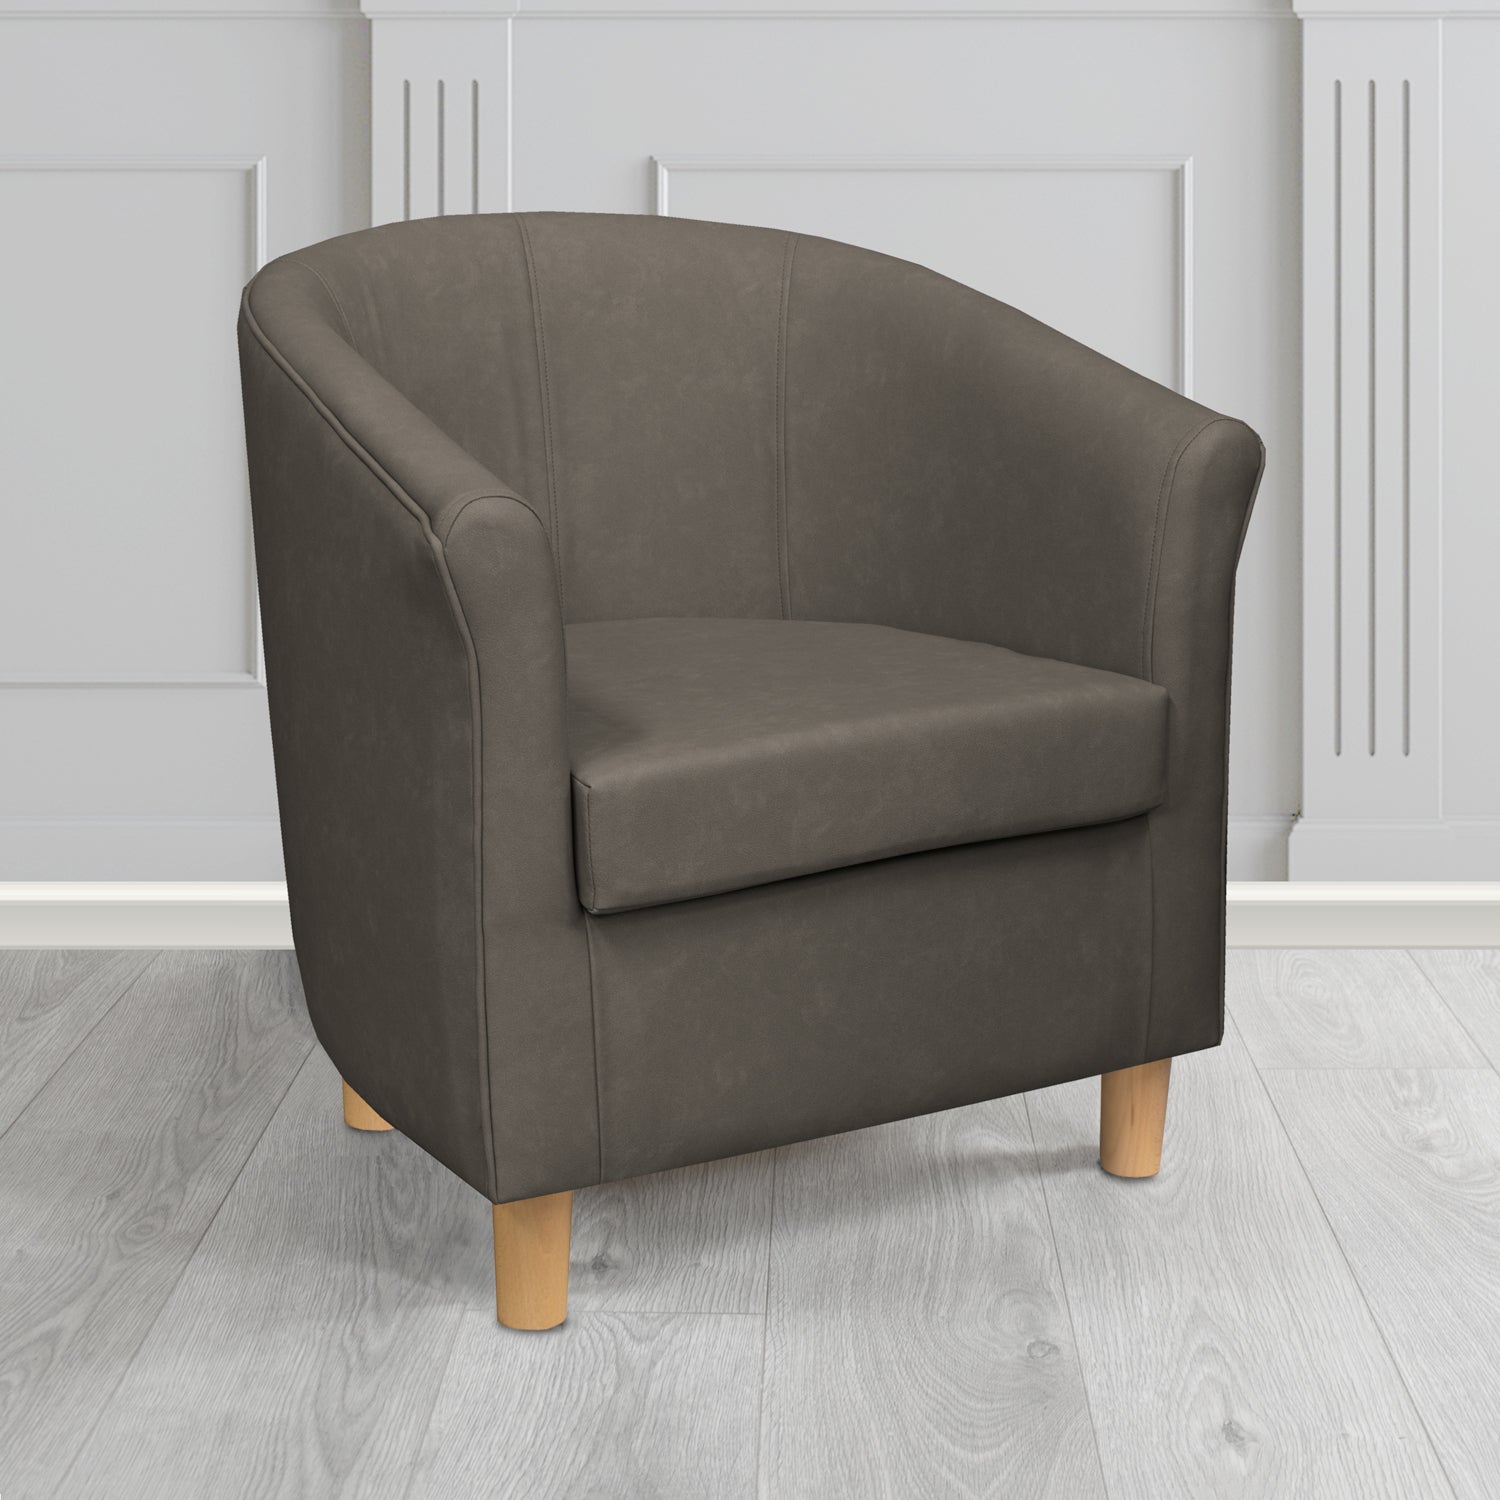 Tuscany Tub Chair in Infiniti Espresso INF1851 Antimicrobial Crib 5 Faux Leather - The Tub Chair Shop